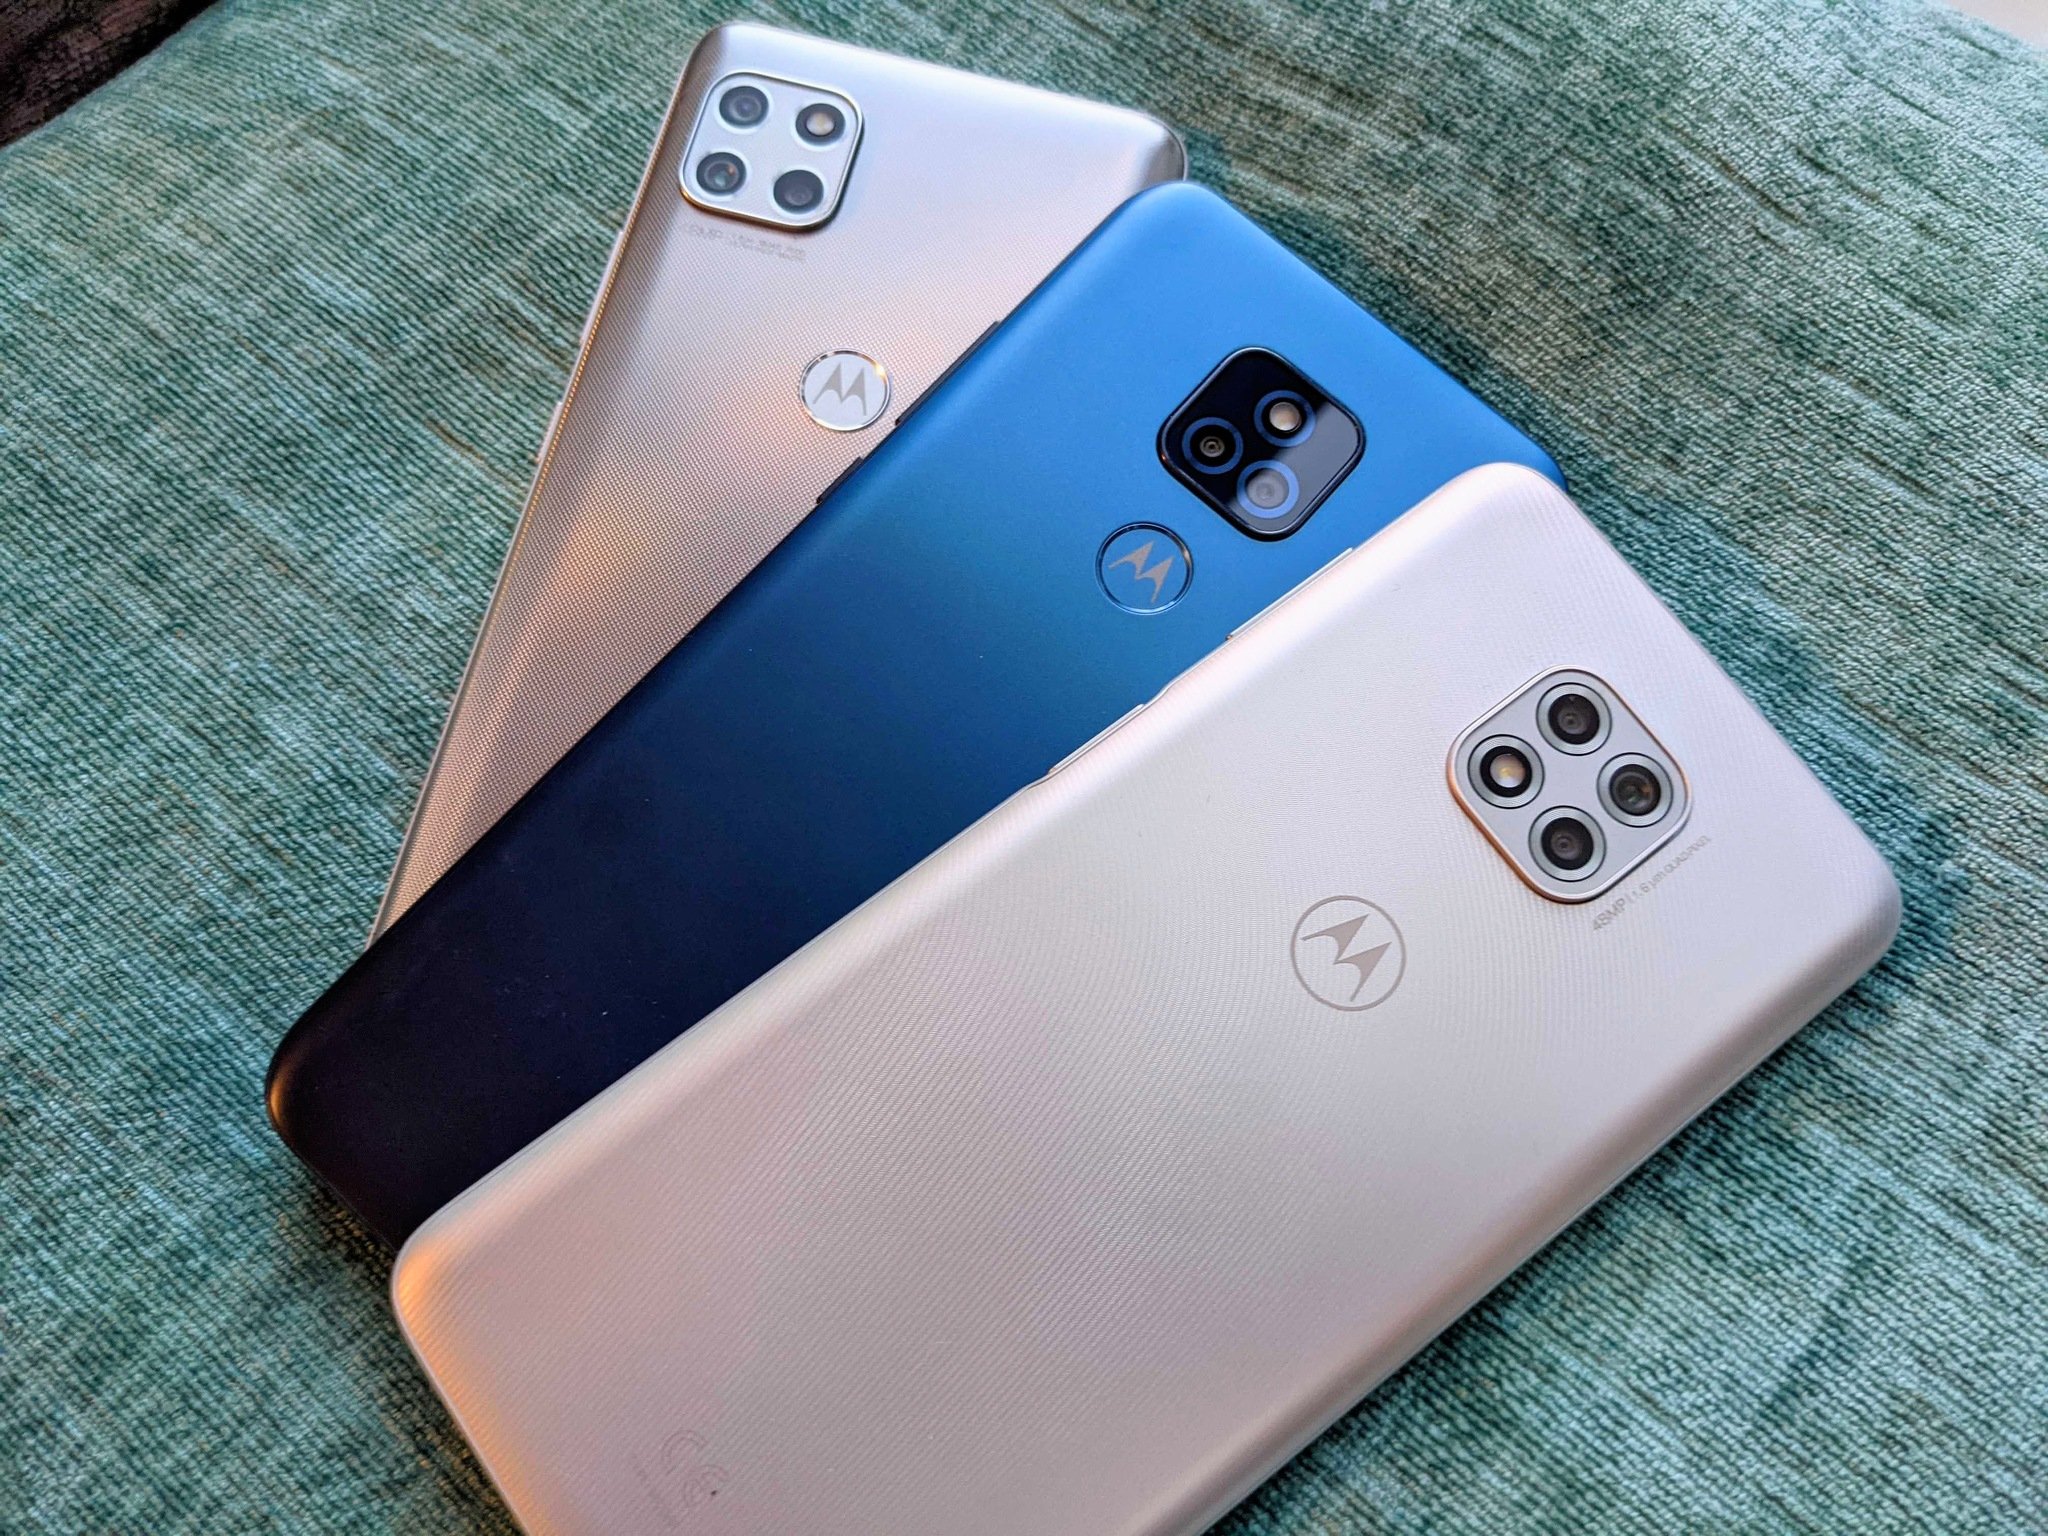 Motorola’s 2021 phone strategy does not make much sense, but it will still be the winner